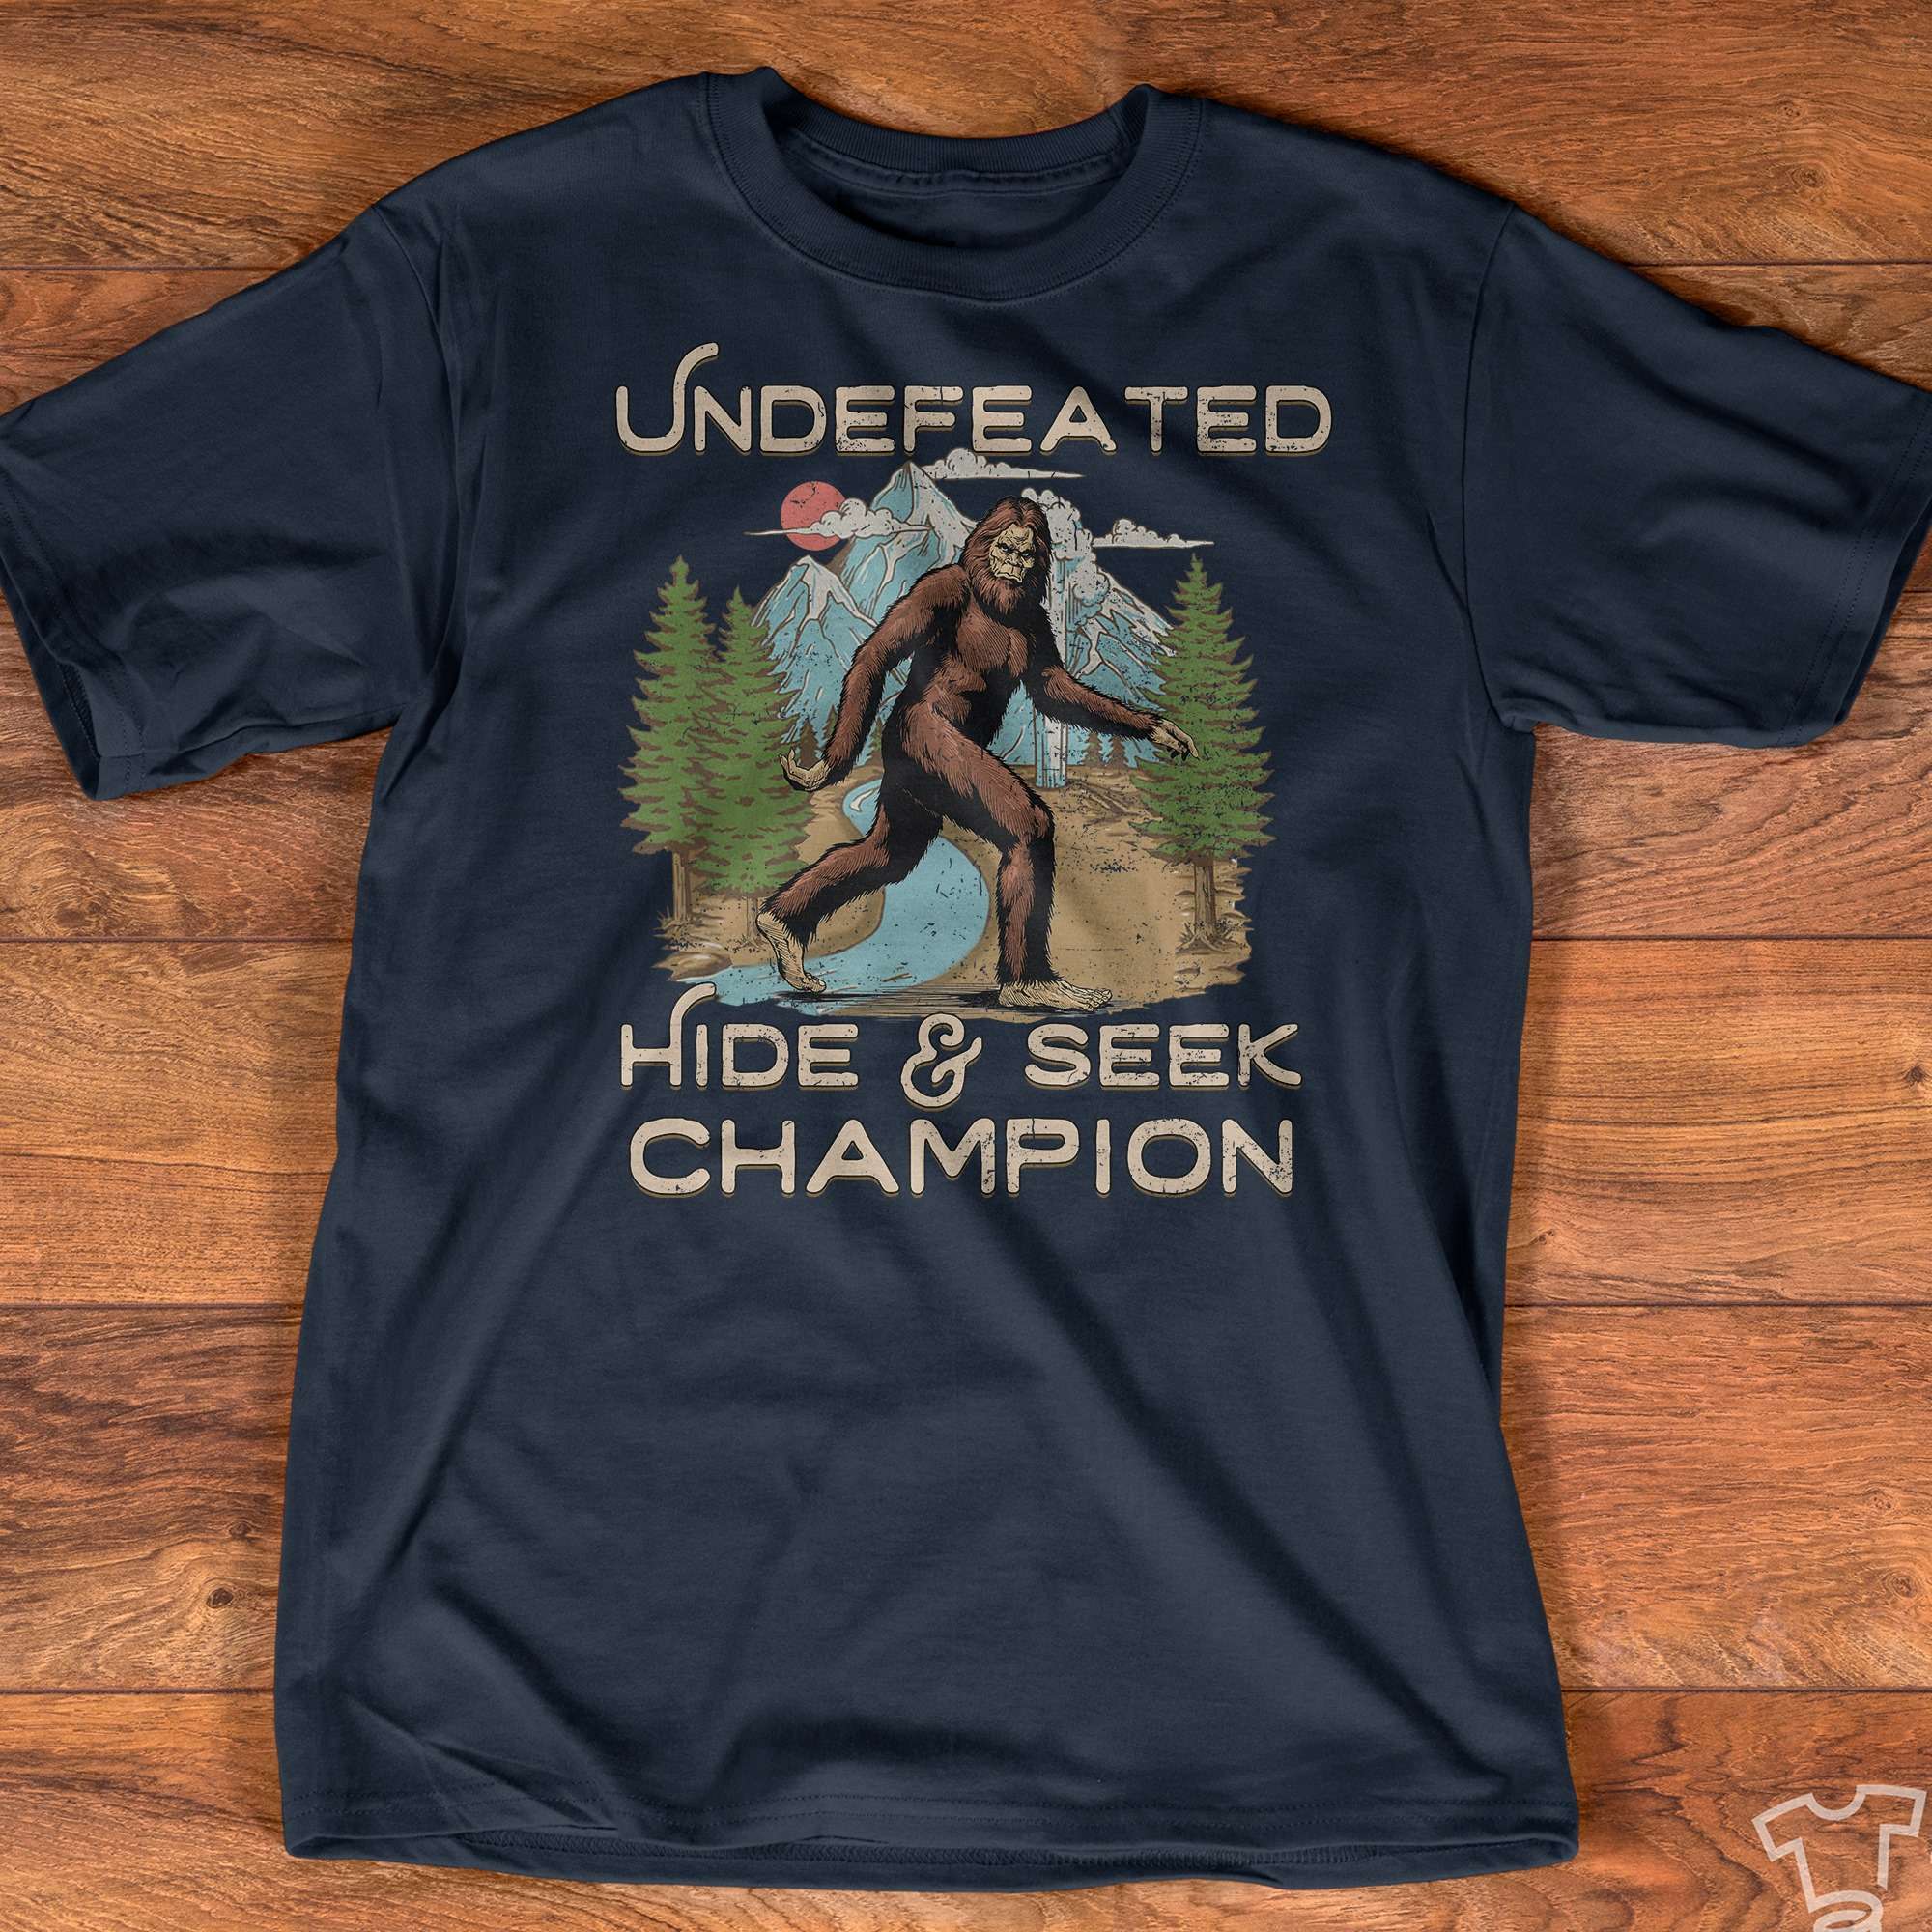 Undefeated hide and seek champion - Bigfoot hide and seek champion, bigfoot on the mountain